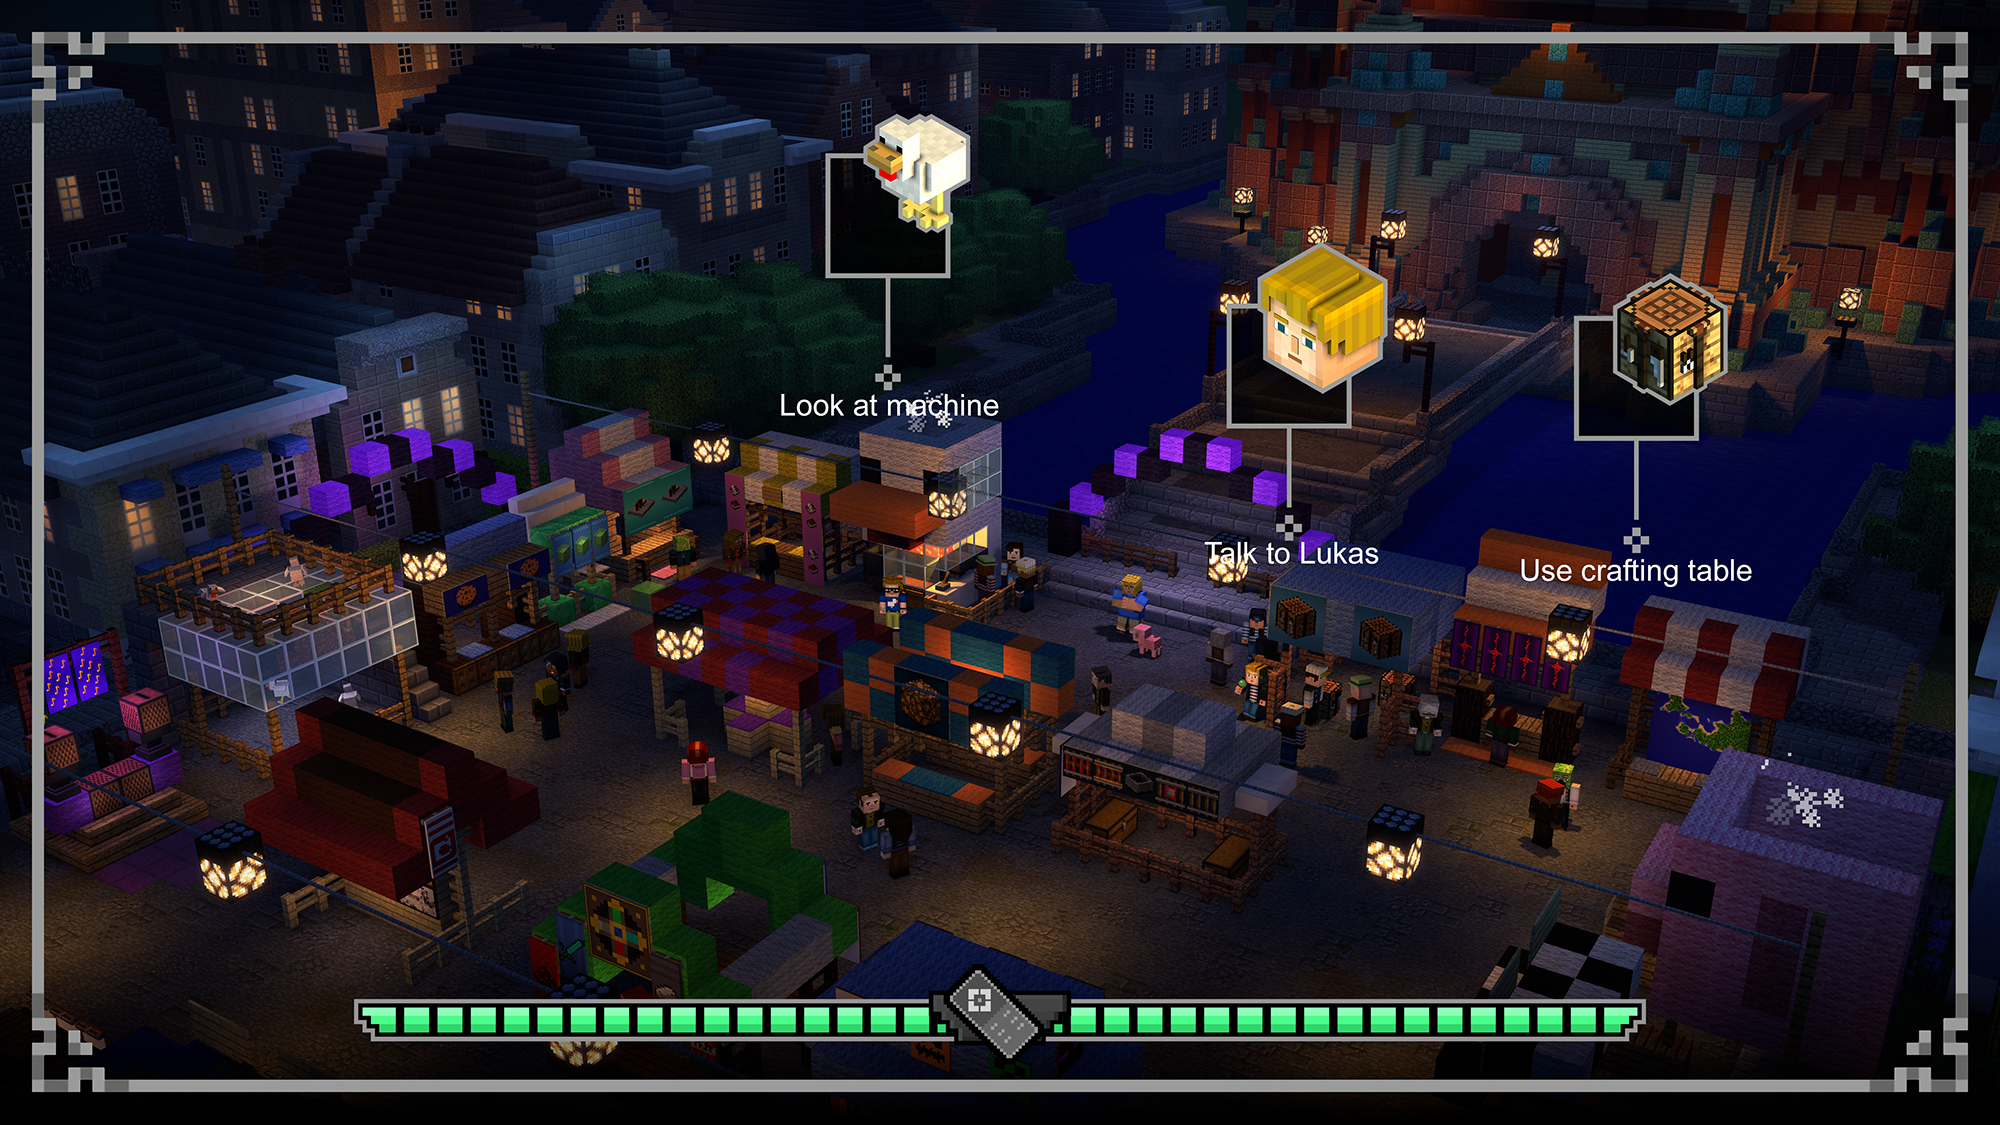 Minecraft: Story Mode Launches On Netflix - Game Informer